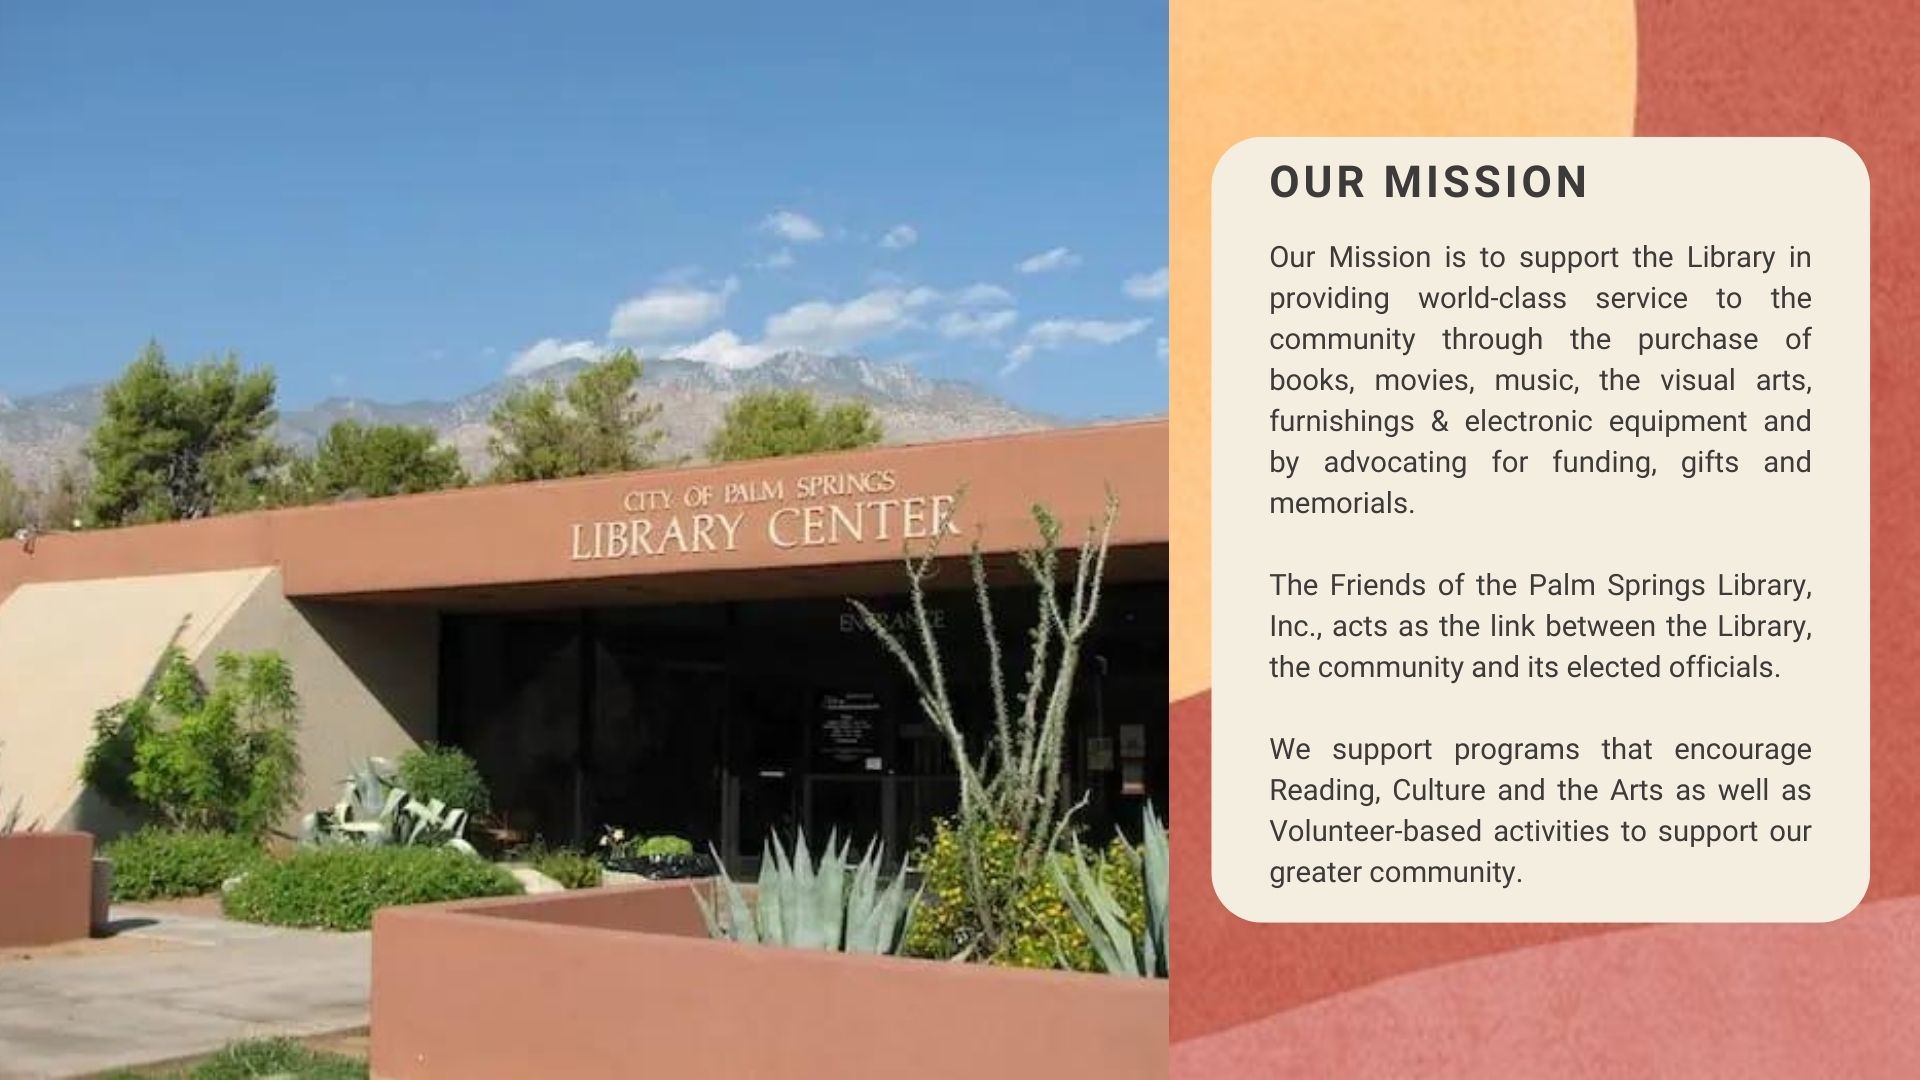  Our Mission is to support the Library in providing world-class service to the community through the purchase of books, movies, music, the visual arts, furnishings & electronic equipment and by advocating for funding, gifts and memorials.  The Friends of the Palm Springs Library, Inc., acts as the link between the Library, the community and its elected officials.   We support programs that encourage Reading, Culture and the Arts as well as Volunteer-based activities to support our greater community.